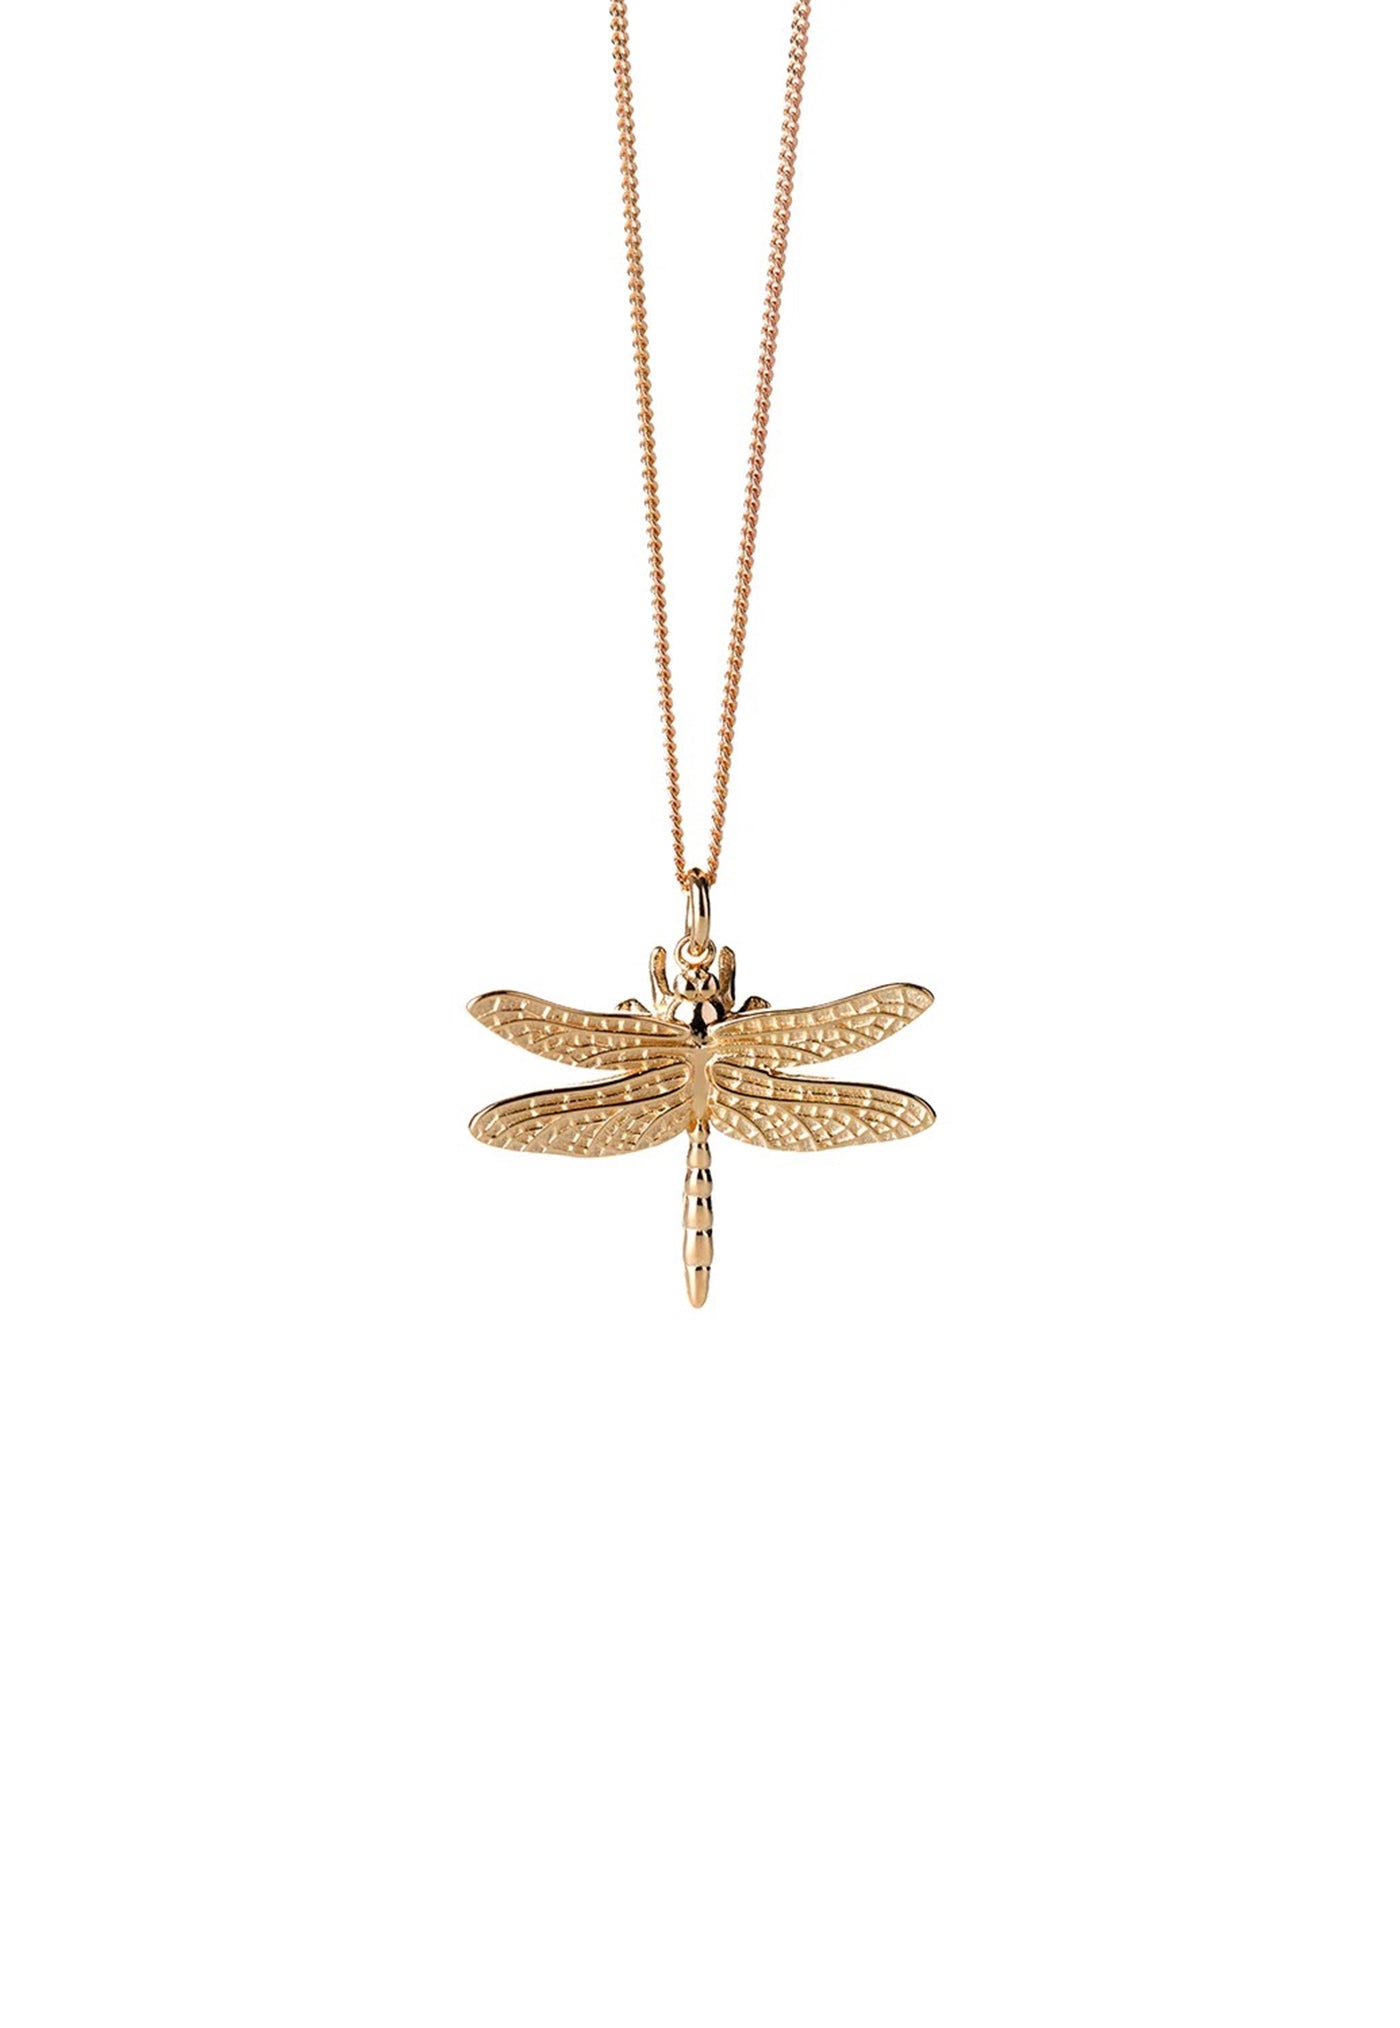 Dragonfly Necklace sold by Angel Divine